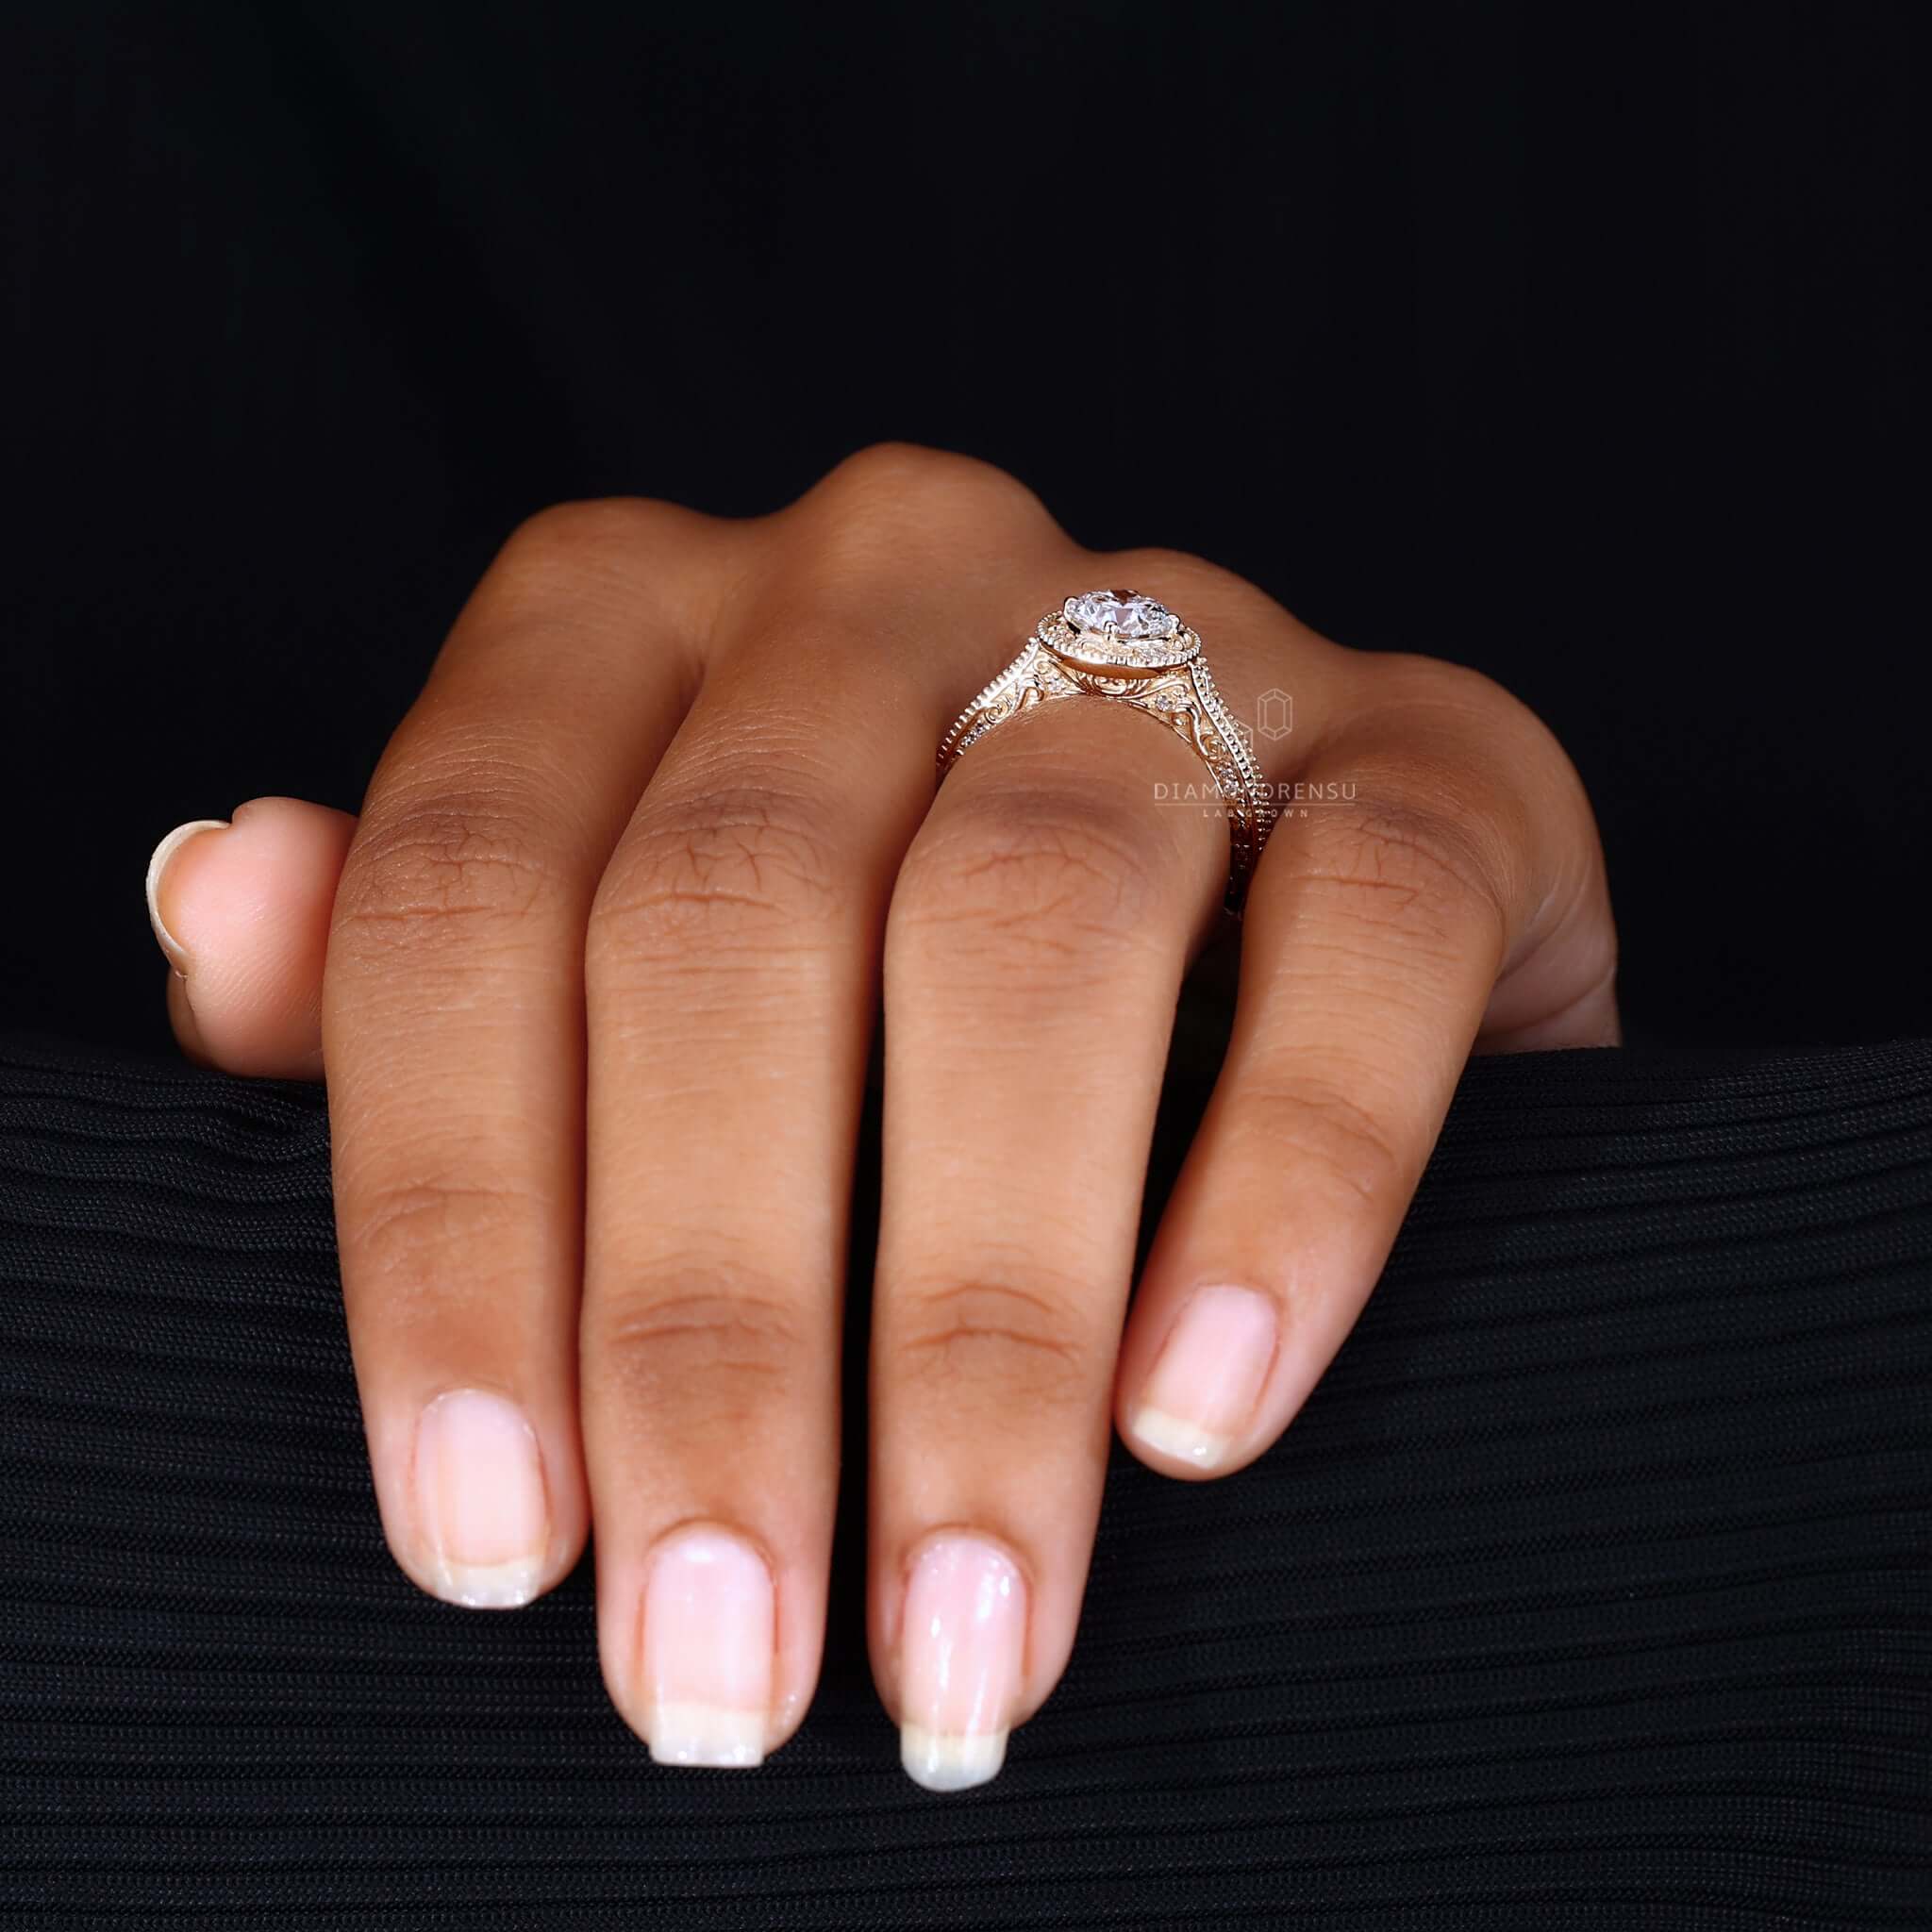 Woman's hand adorned with a vintage art deco ring, exemplifying the elegance of past eras